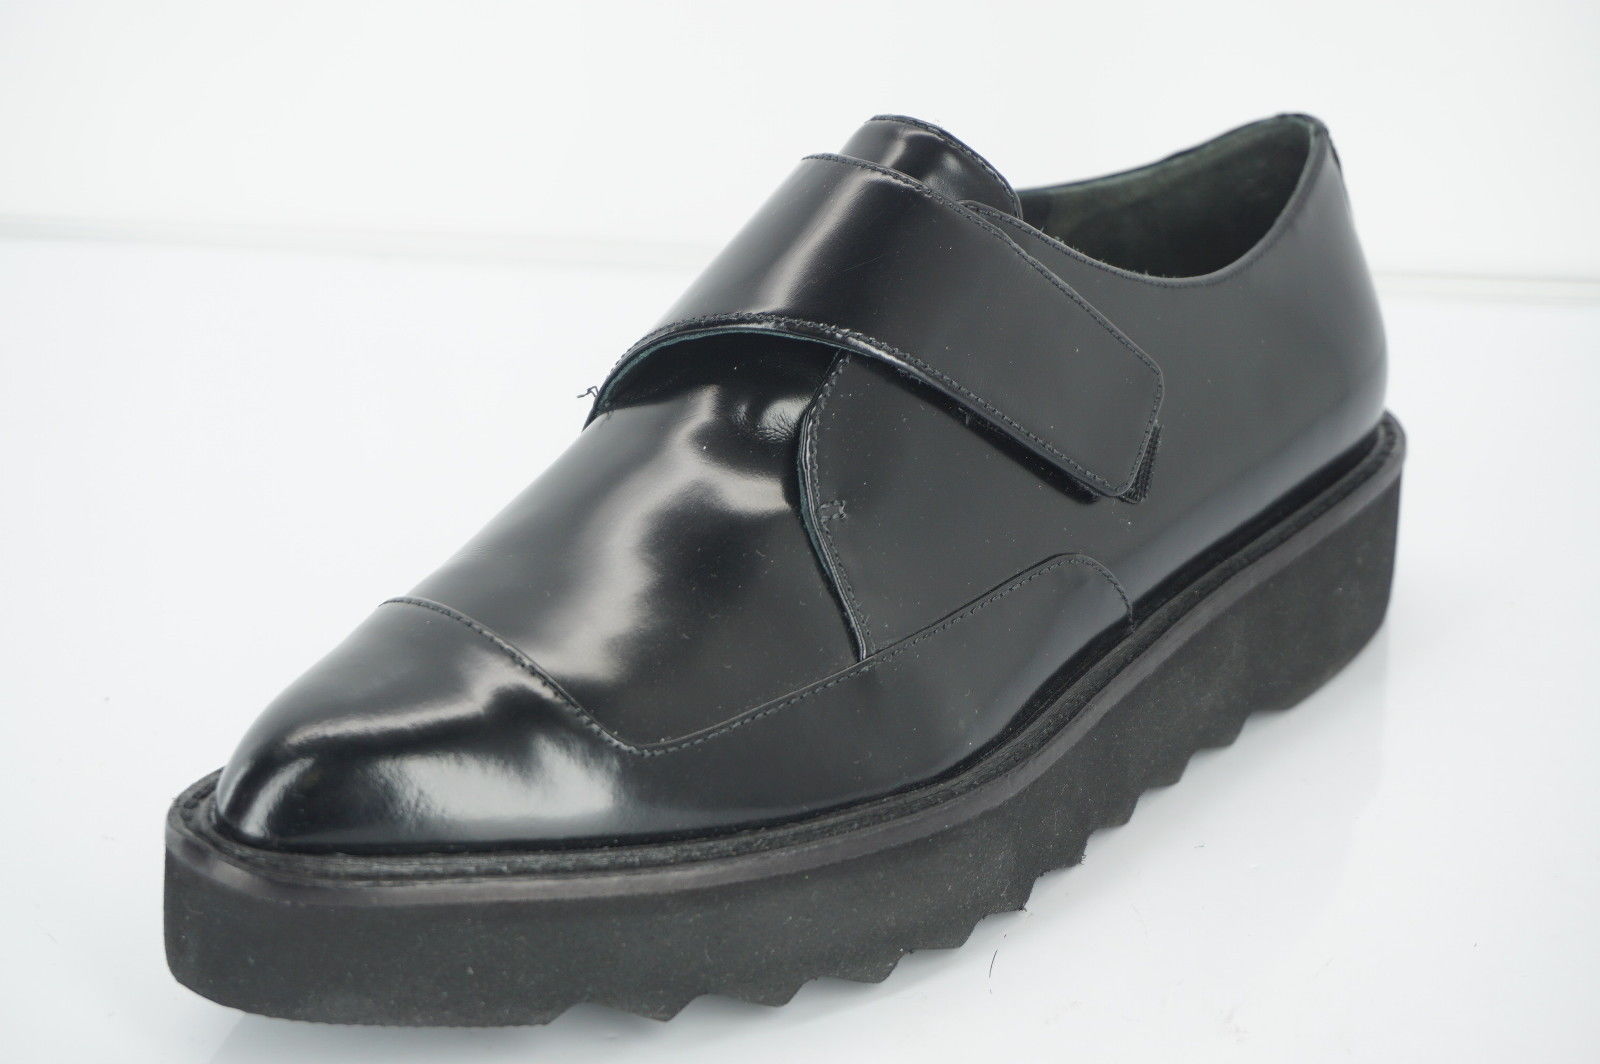 Vince Black Leather Arden Monk Strap Creeper Loafers Size 7.5 Womens NIB $395 Sz